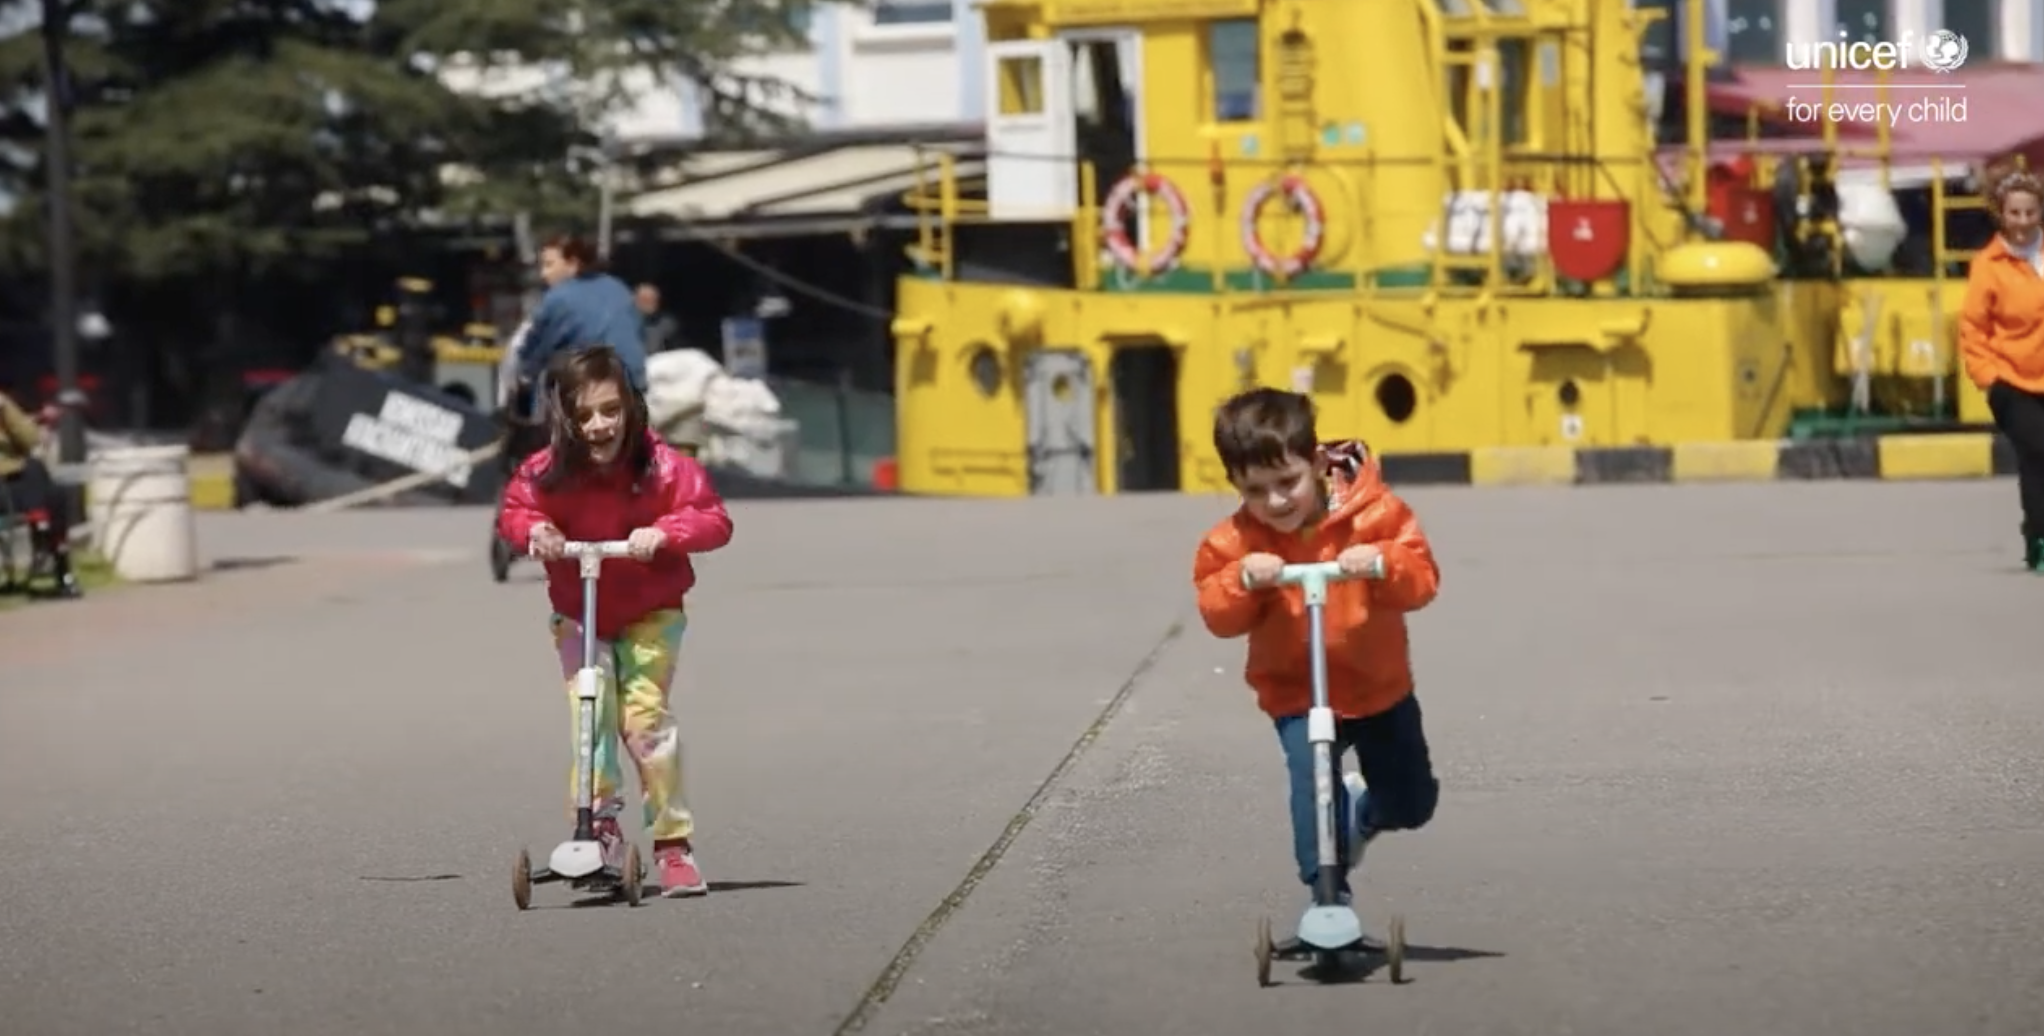 How the kids from Batumi, Georgia, were treated for high blood lead level